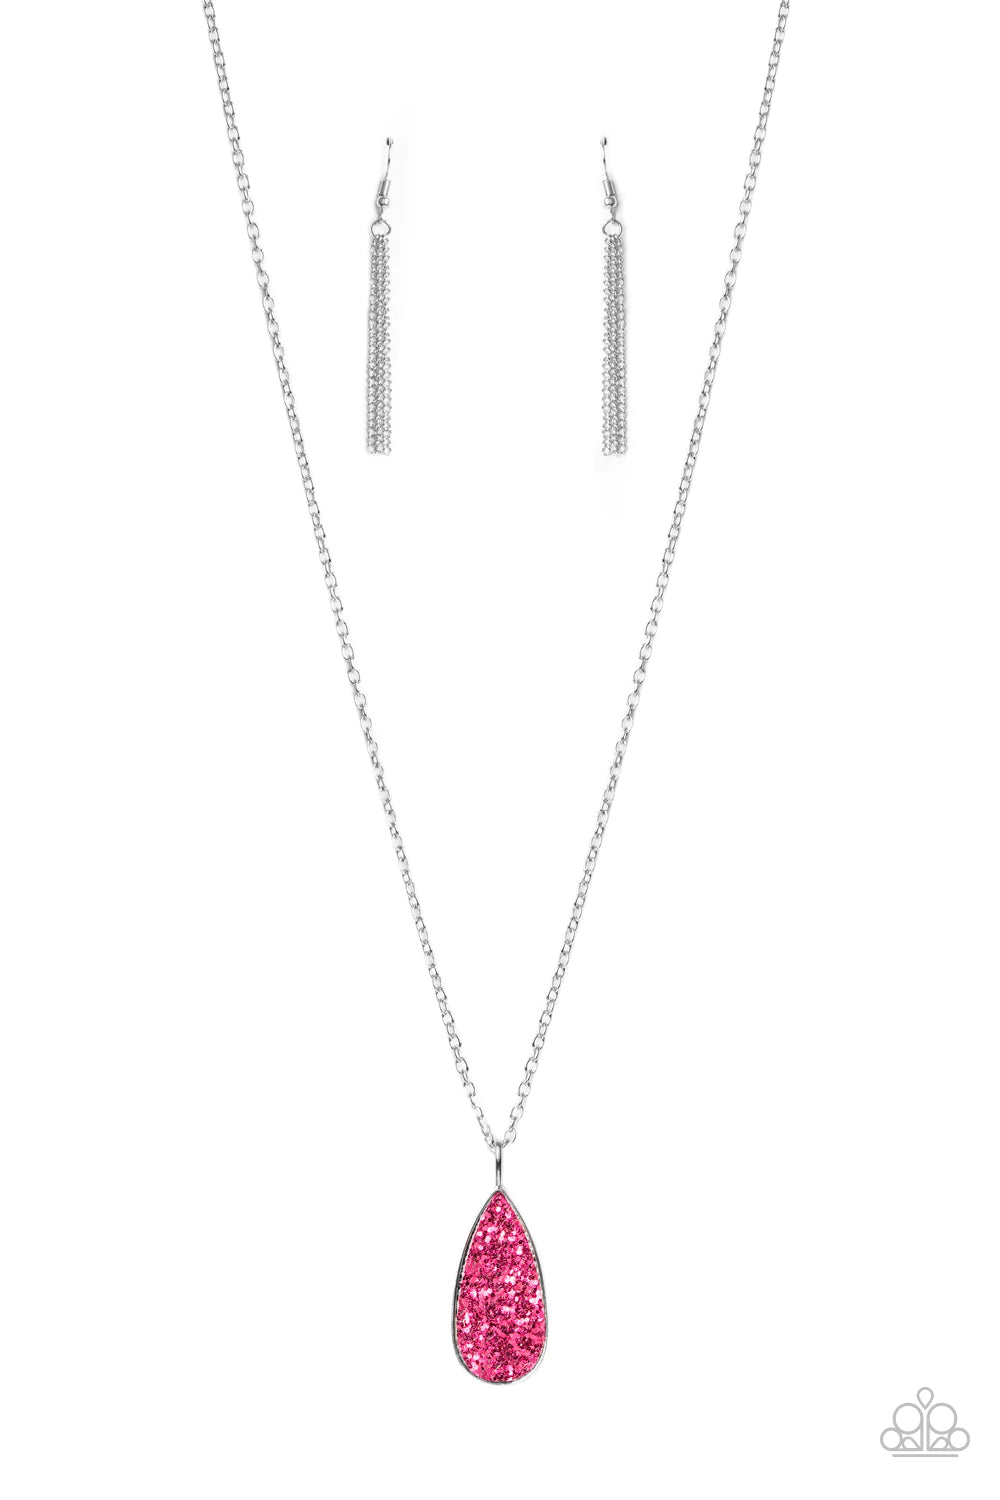 Paparazzi Necklace ~ Daily Dose of Sparkle - Pink